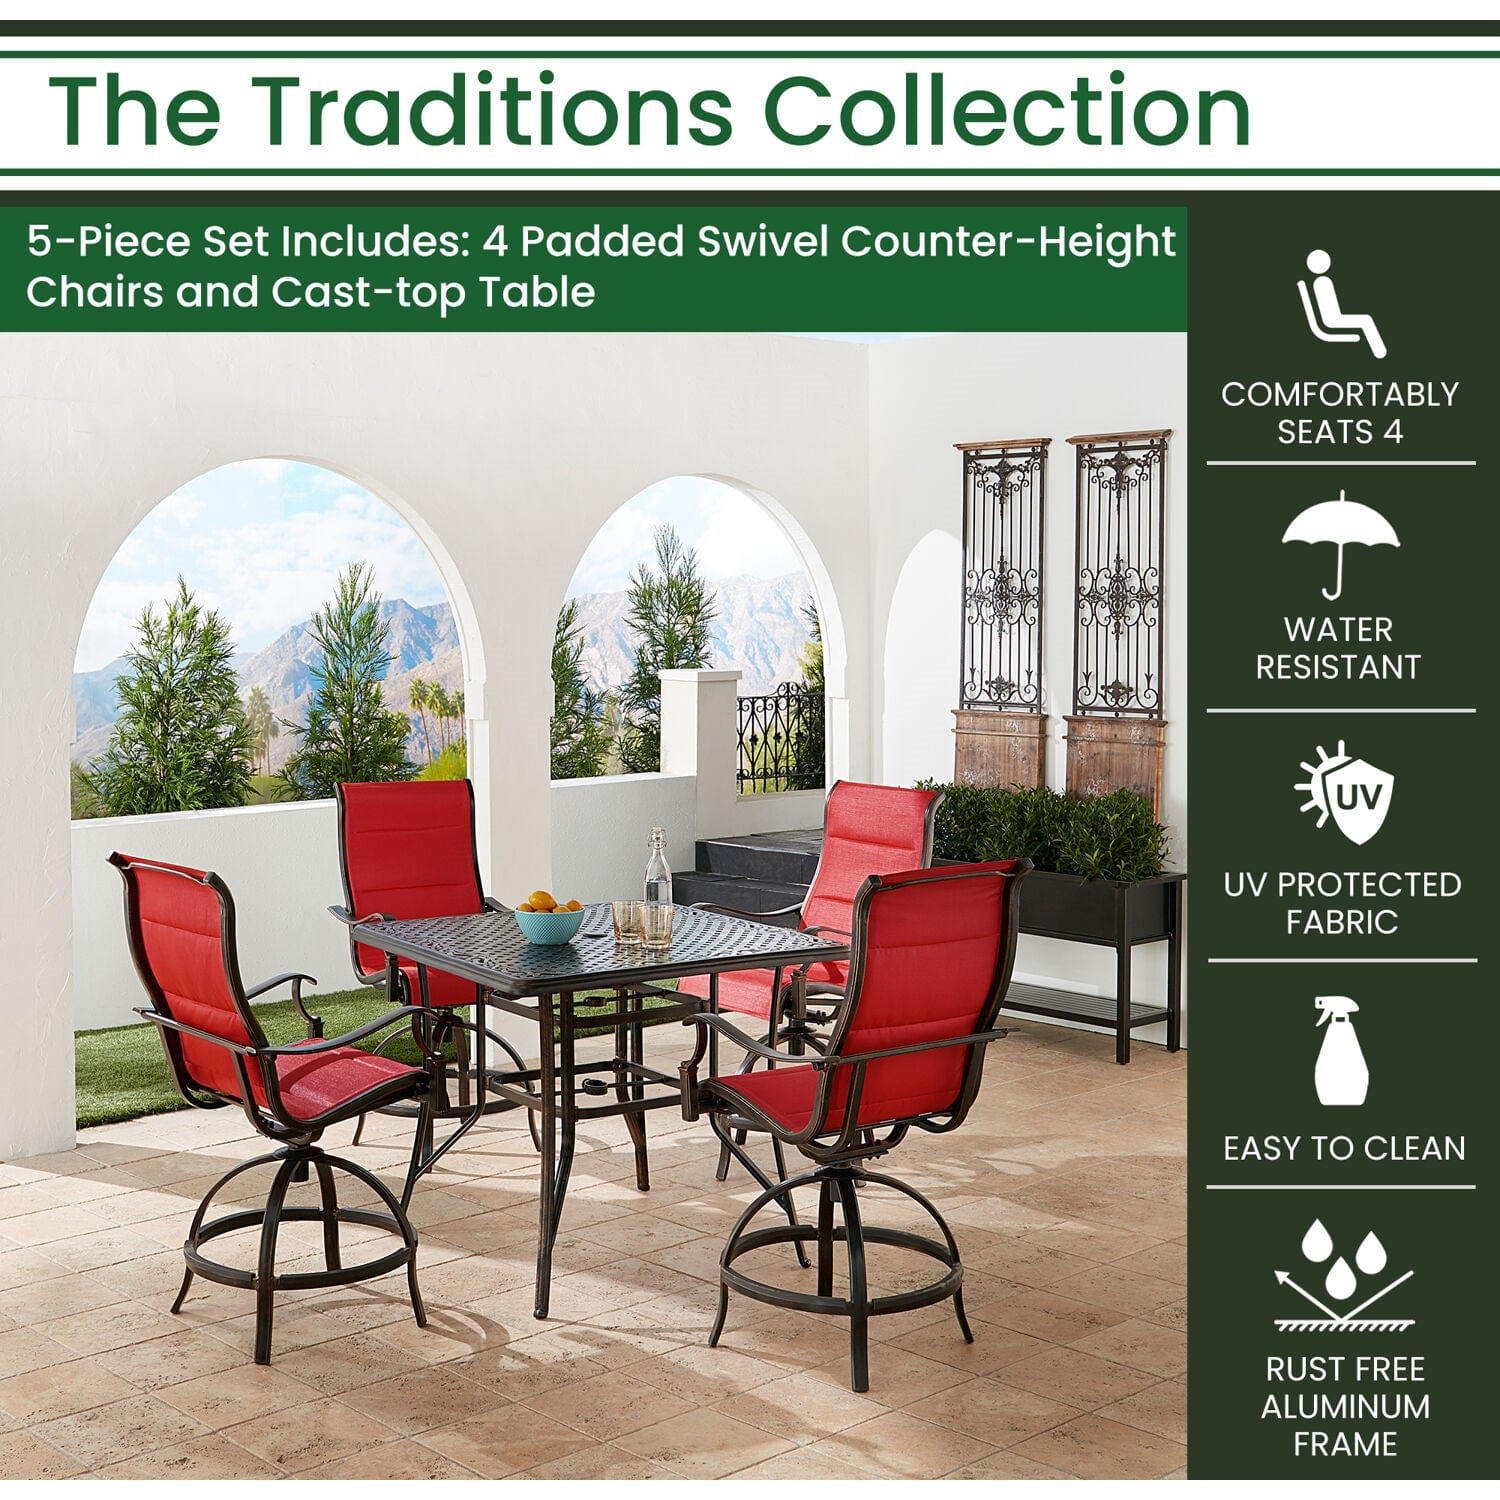 Hanover Outdoor Dining Set Hanover Traditions 5-Piece Aluminium Frame High-Dining Set in Red with 4 Padded Swivel Counter-Height Chairs and 42-in. Cast-top Table | TRADDN5PCPDSQBR-RED